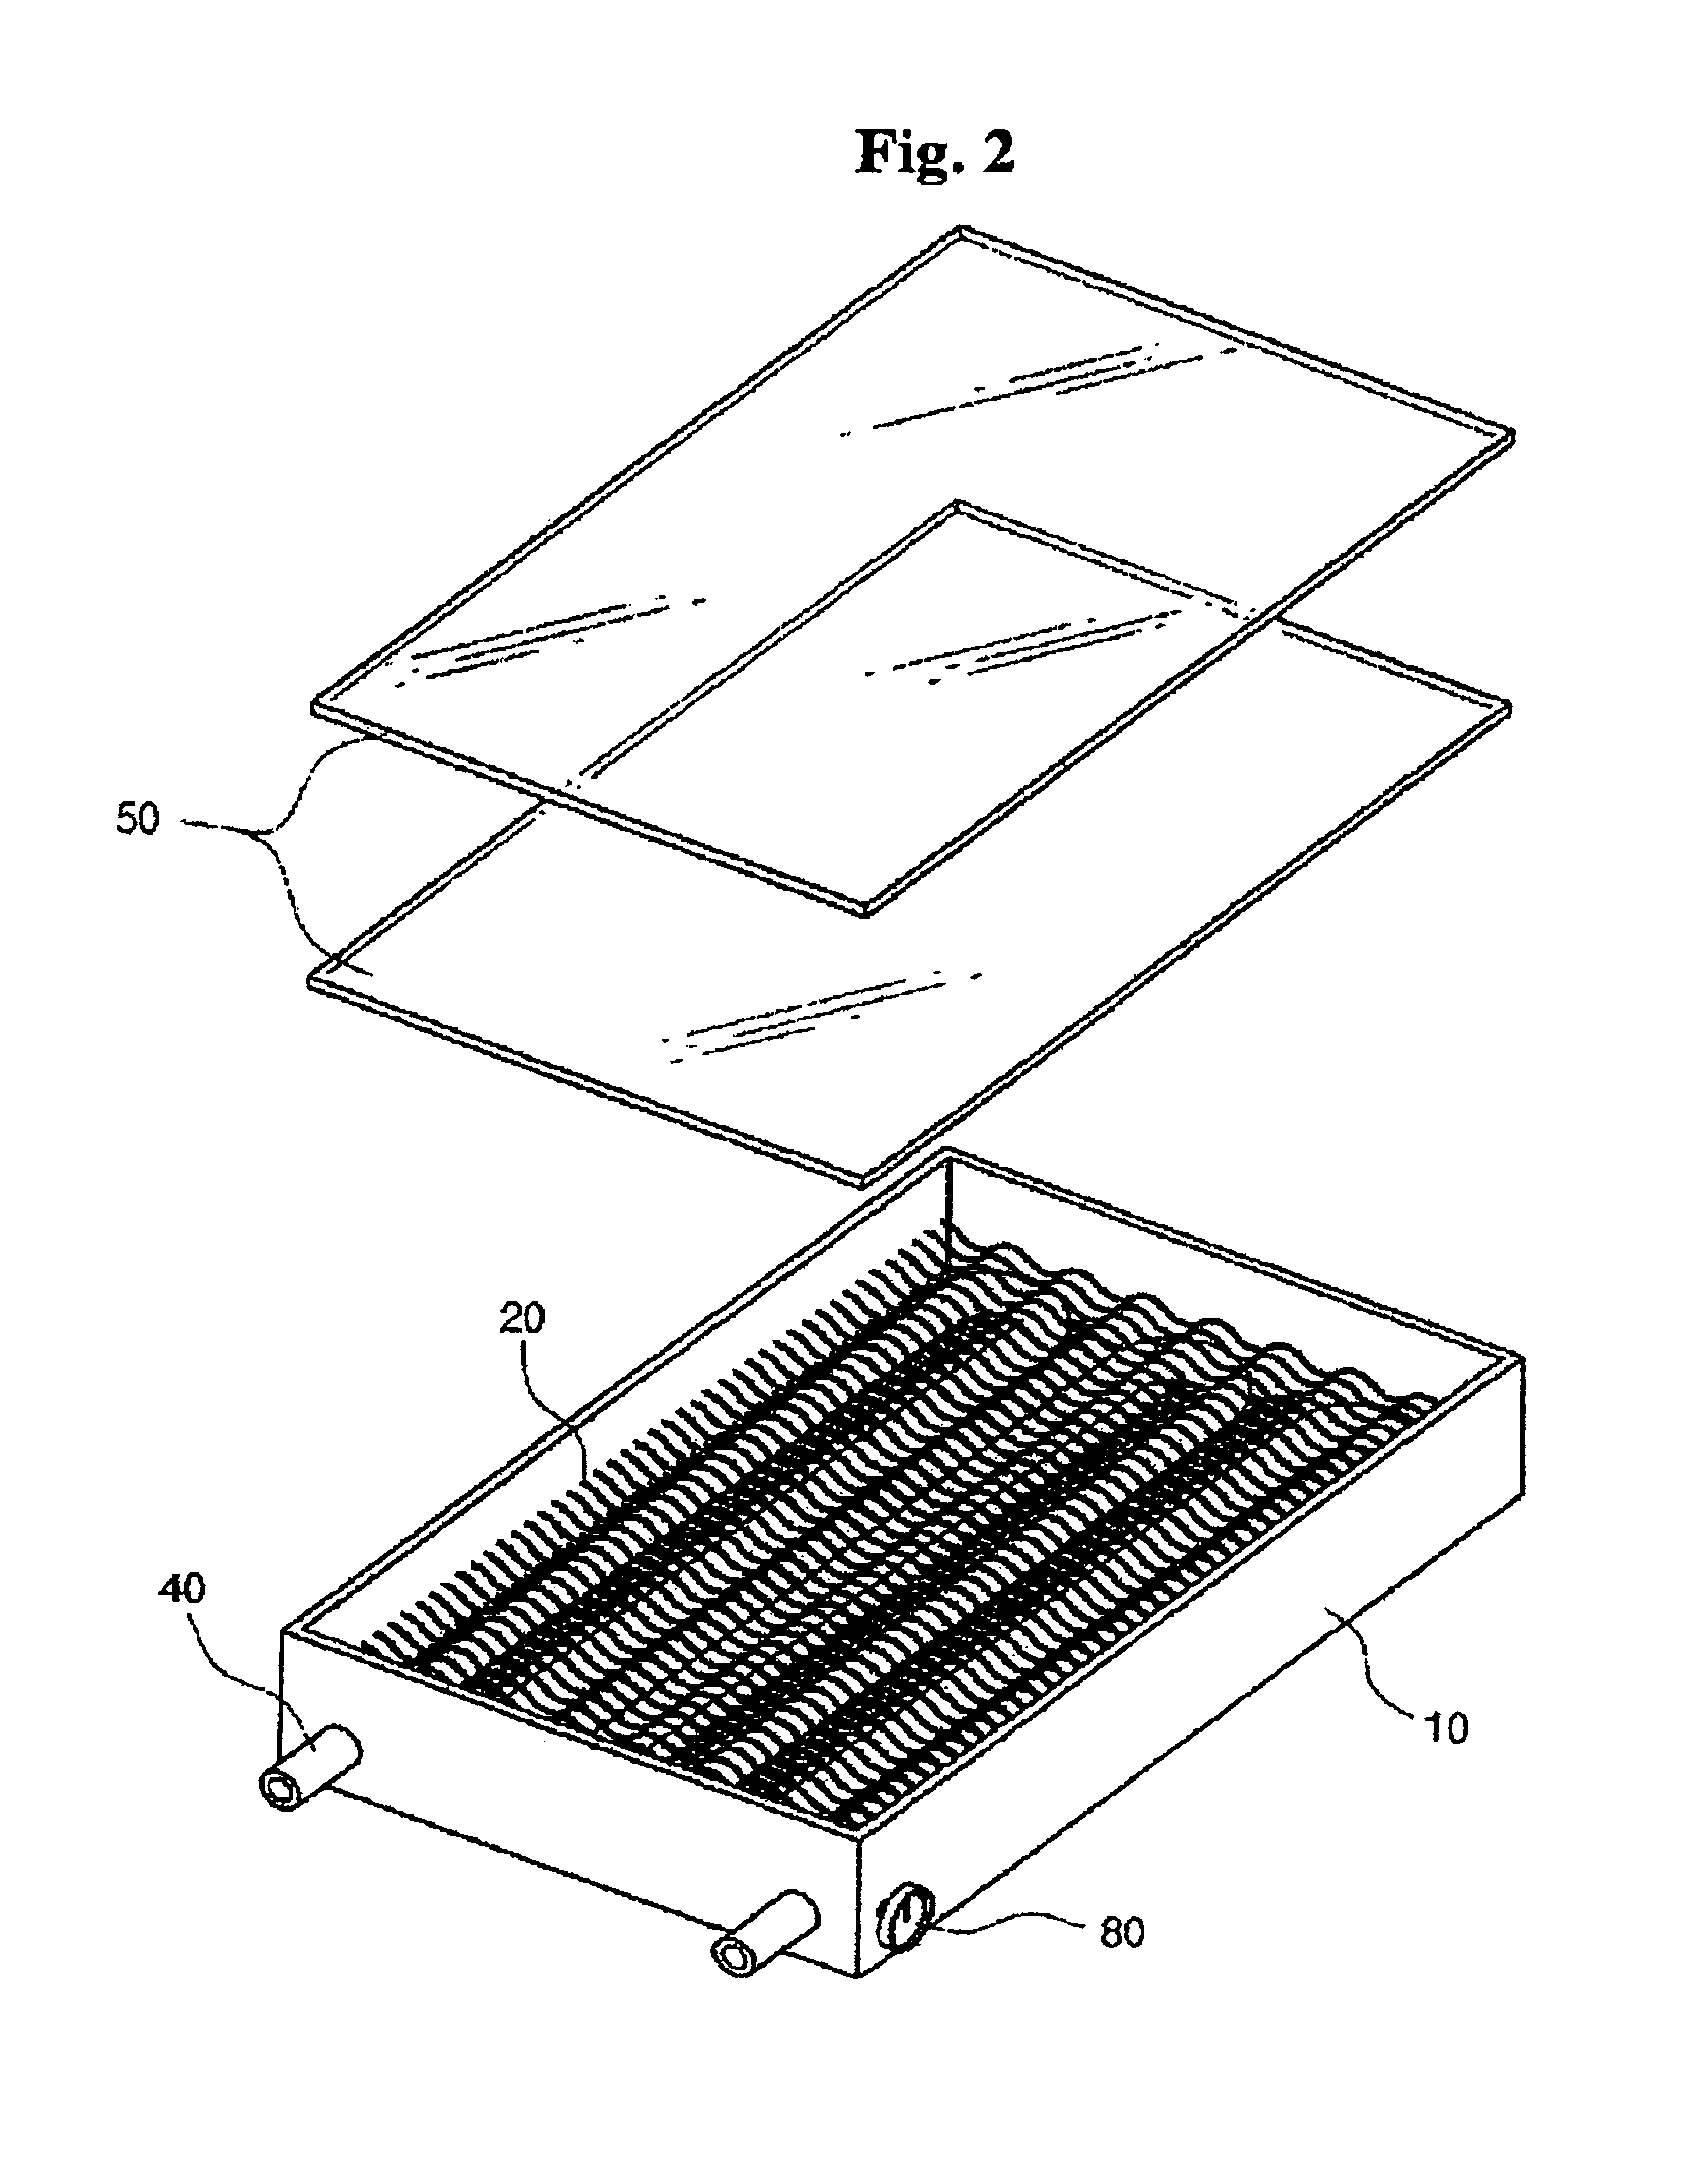 Apparatus for amplifying solar energy by recycling greenhouse gas